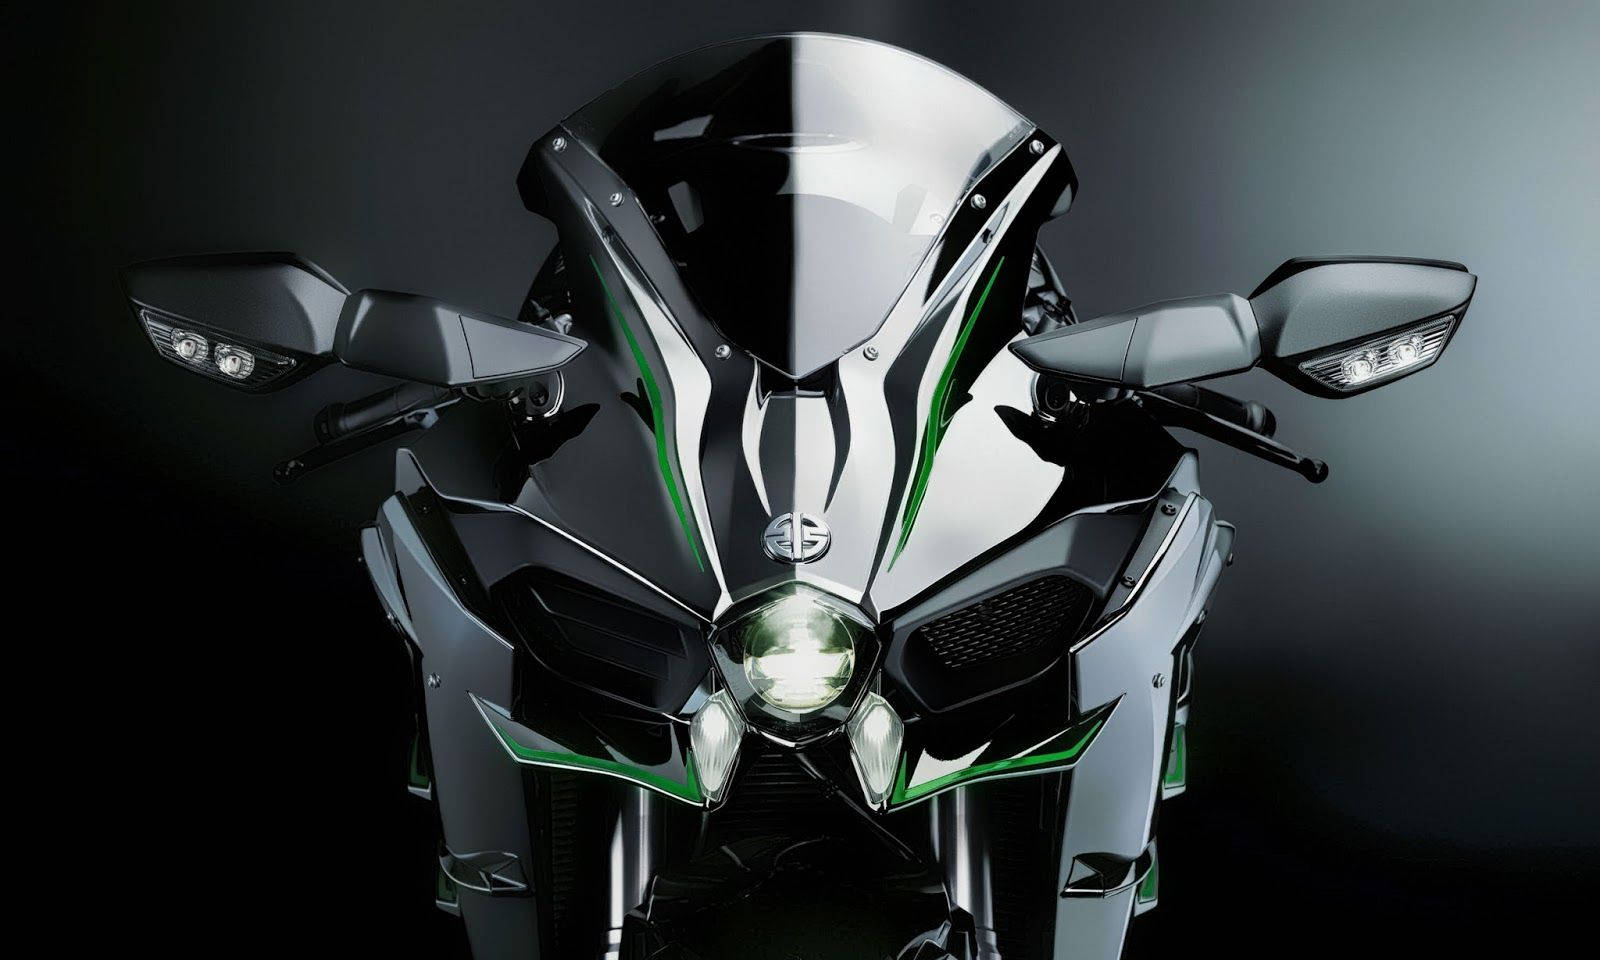 Front View Of A Sleek Kawasaki H2r - The Epitome Of Raw Power And Speed